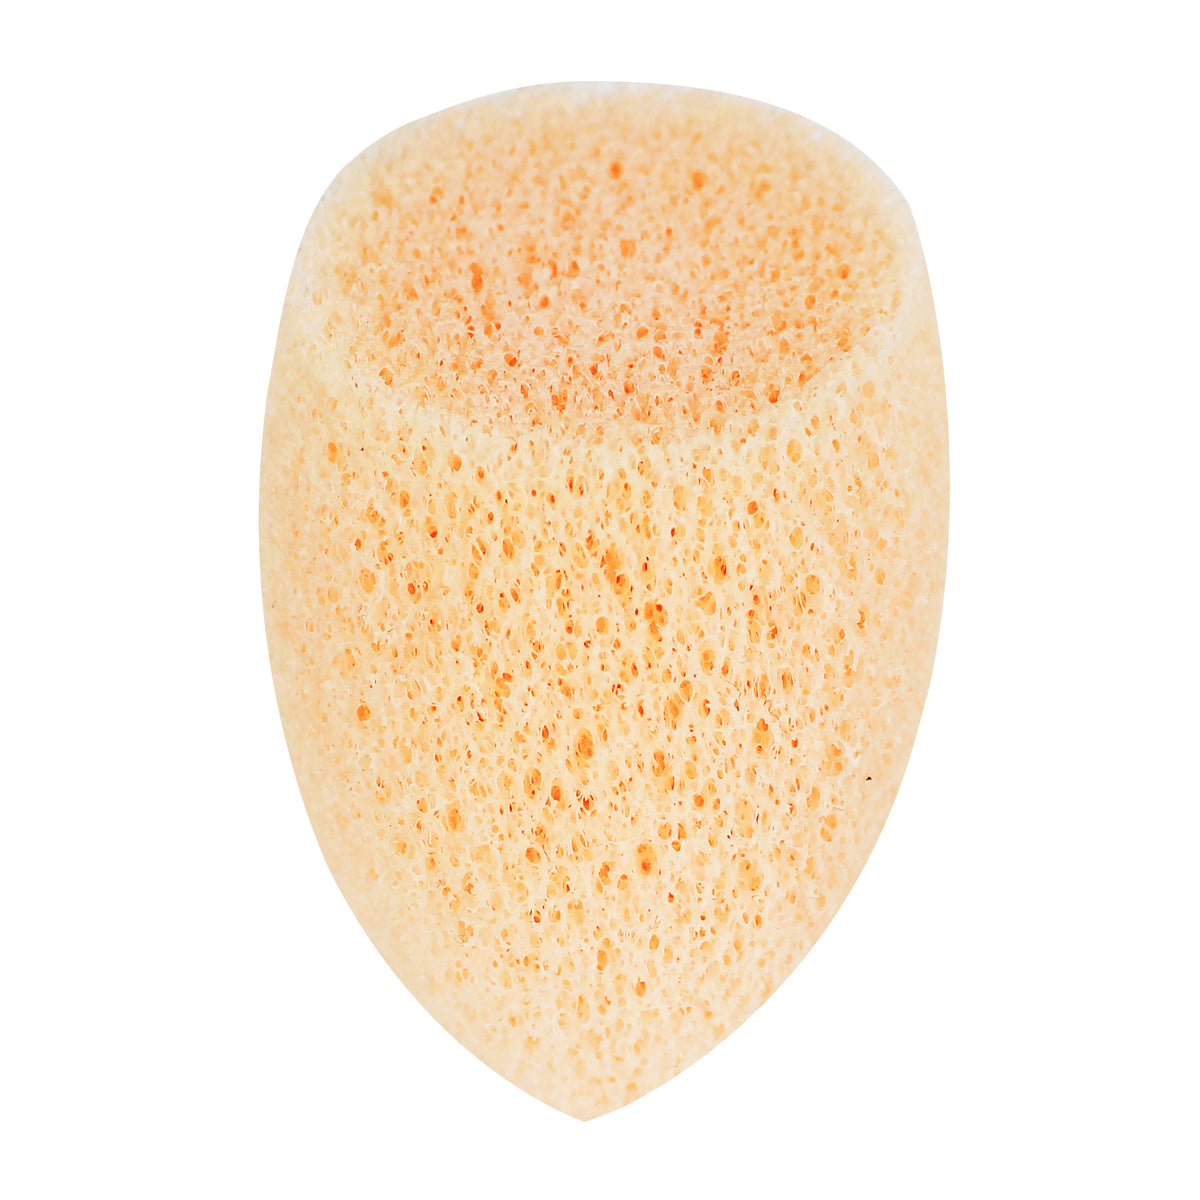 Real Techniques Miracle Cleansing Sponge Beauty Real Techniques   